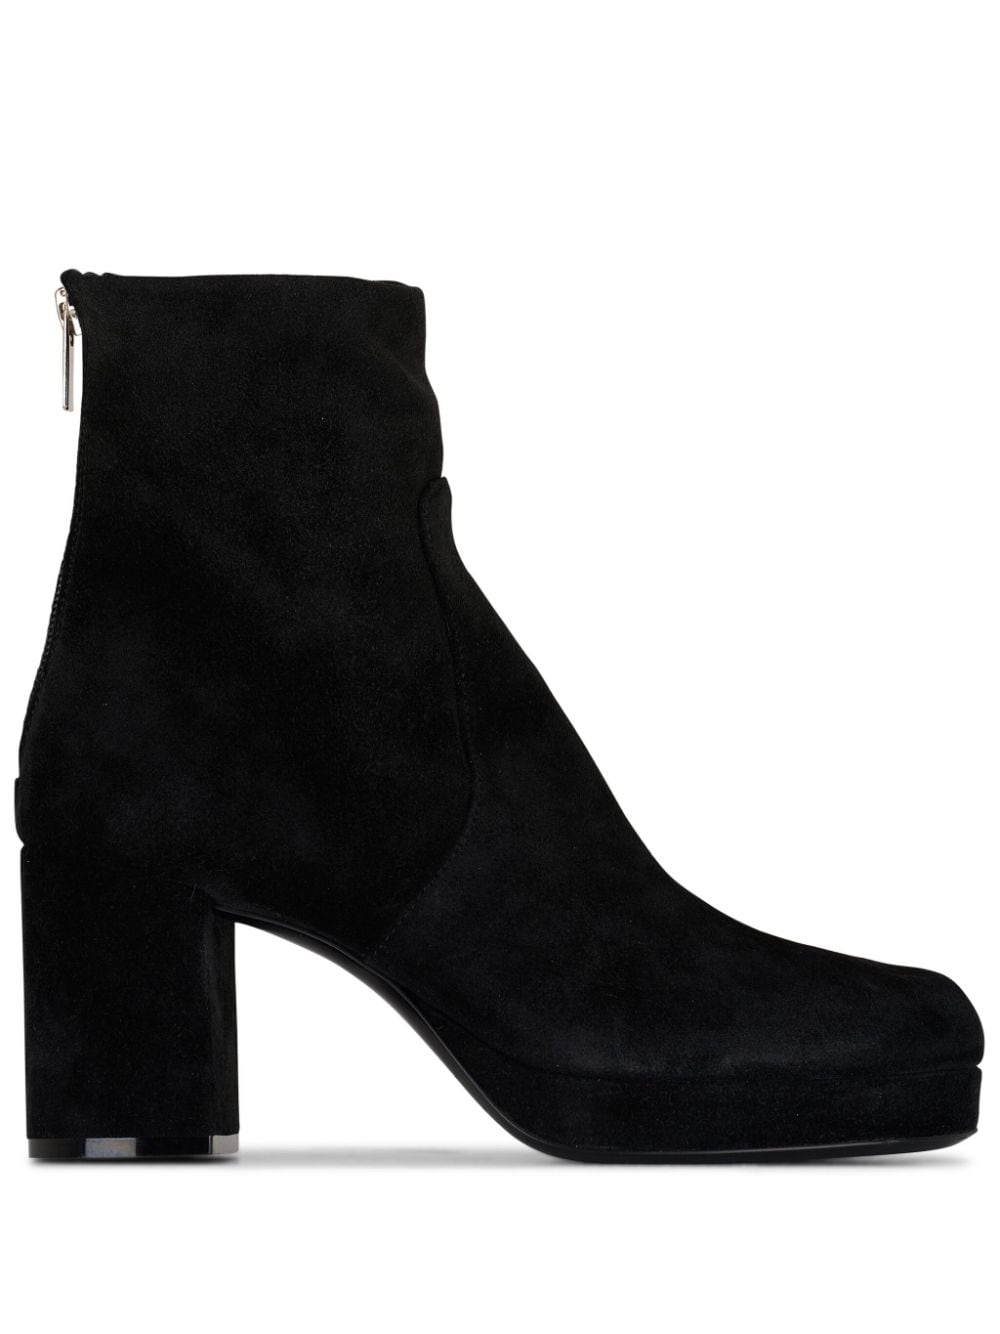 AGL Betty 90mm ankle boots - Black von AGL